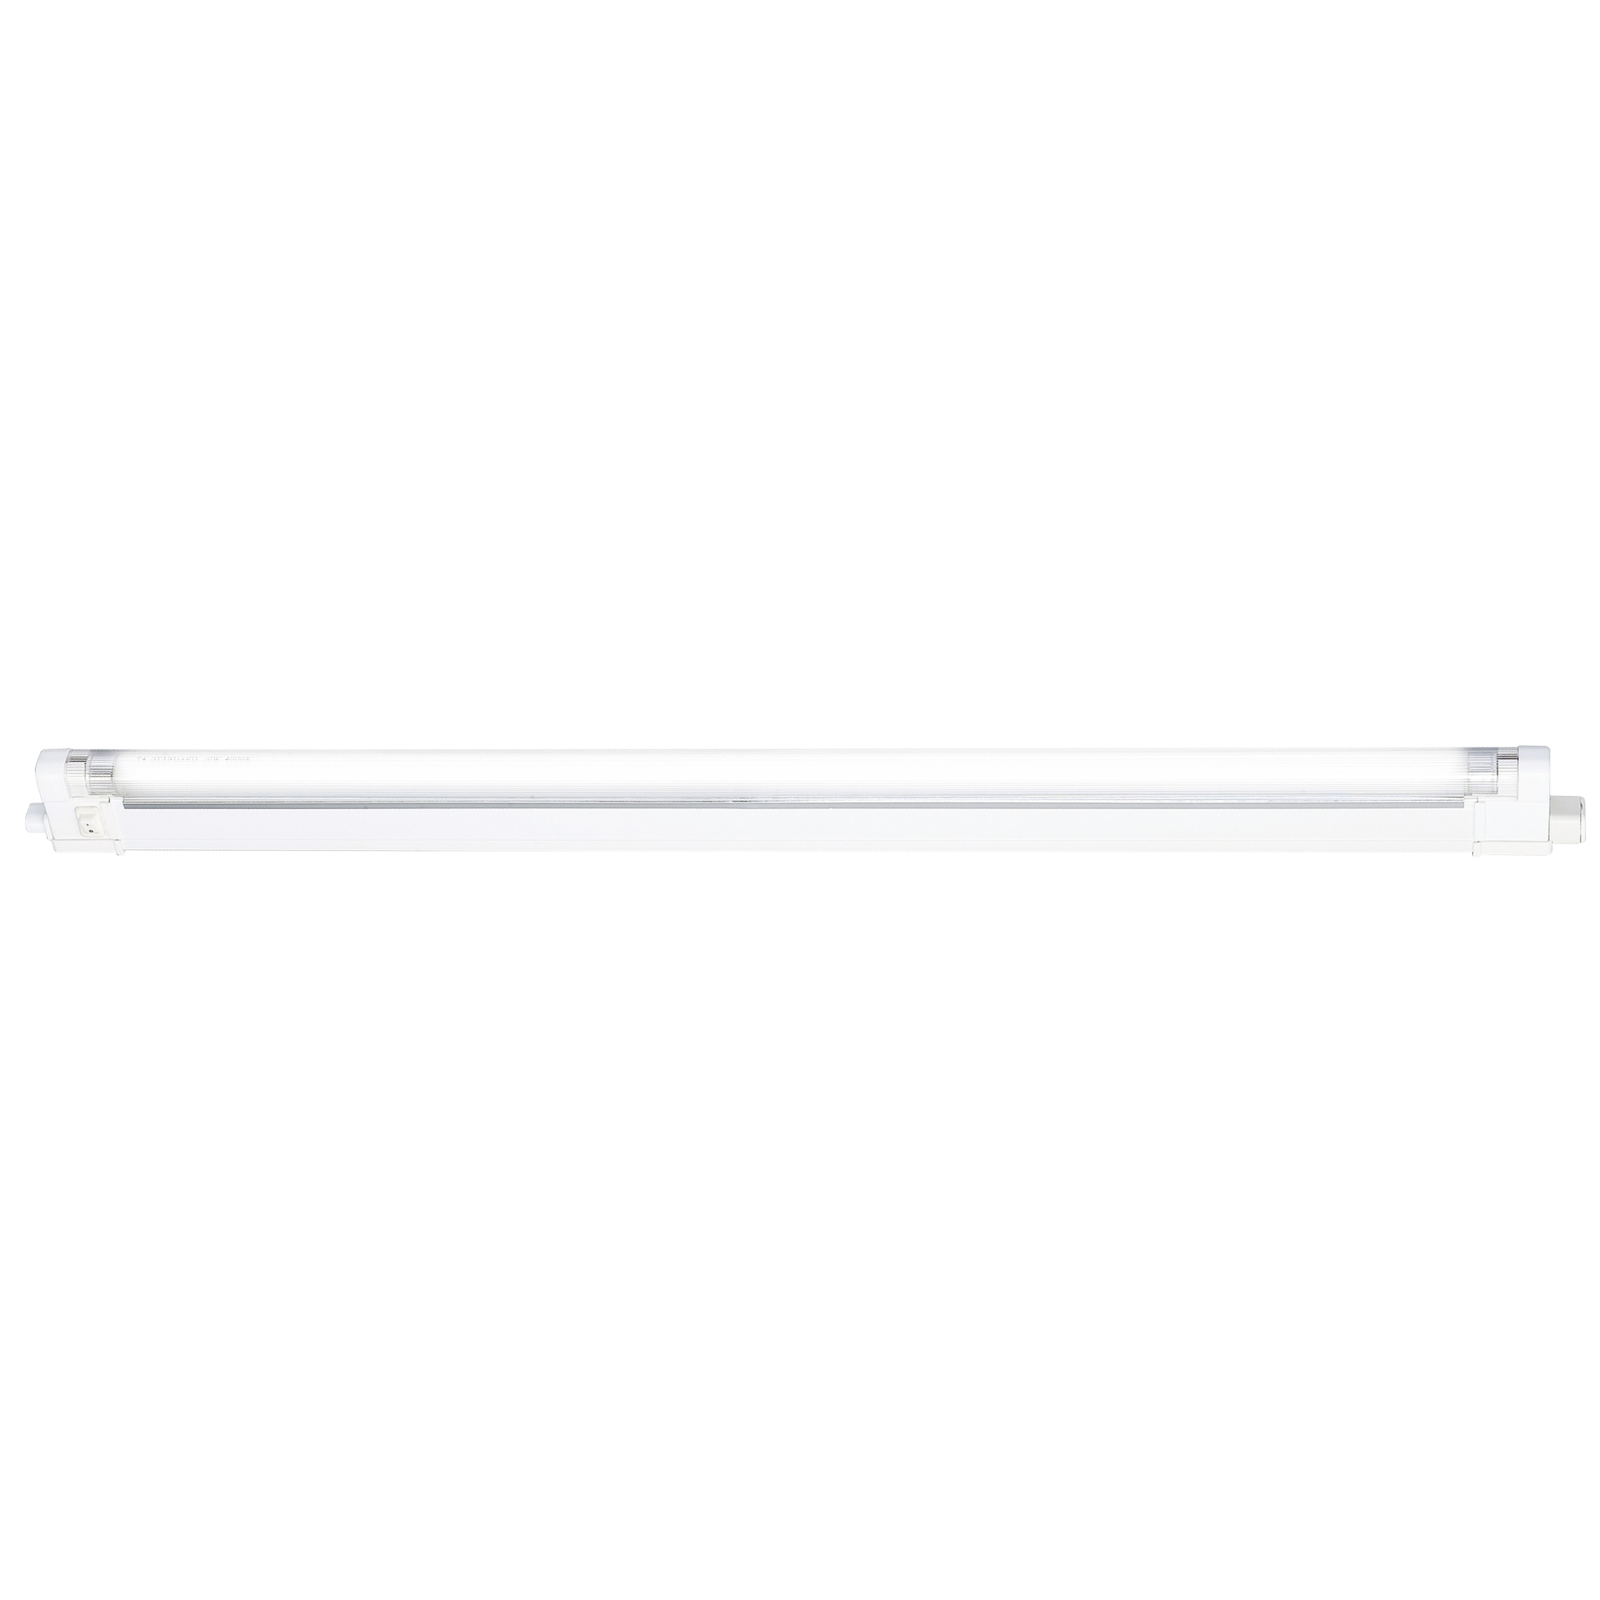 IP20 30W T4 Fluorescent Fitting With Tube, Switch And Diffuser 4000K - T430 